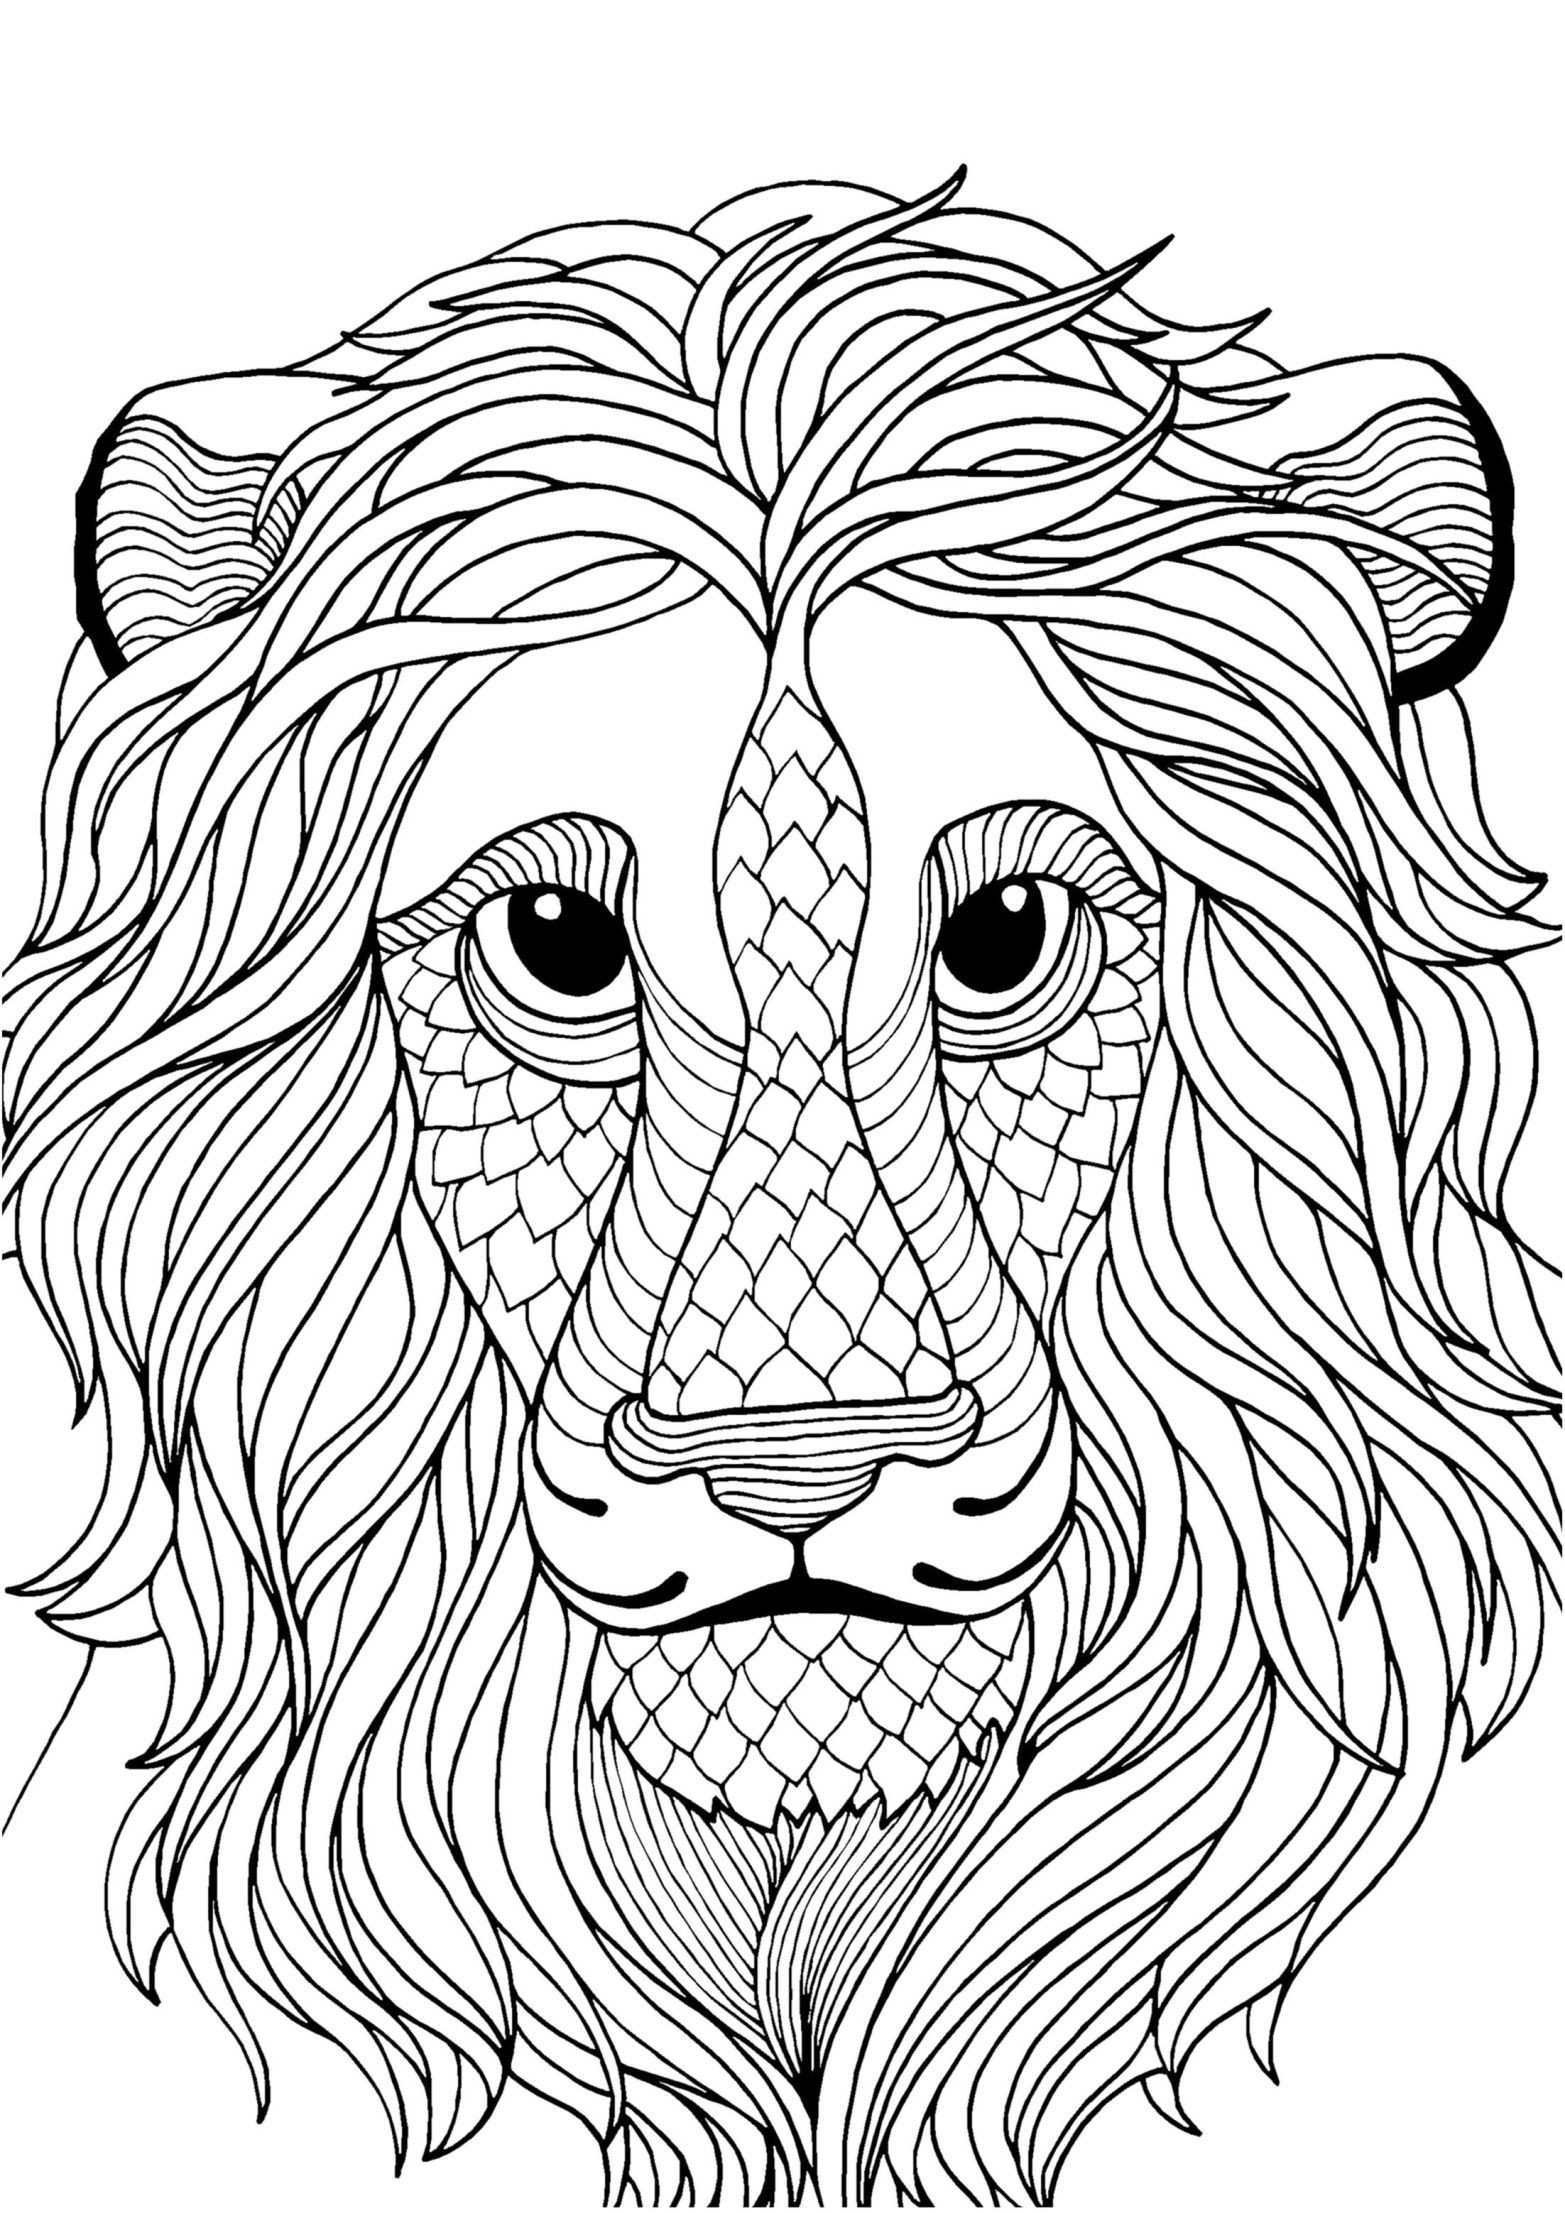 Lion Coloring Pages For Adults
 Lion adult colouring page Colouring In Sheets Art